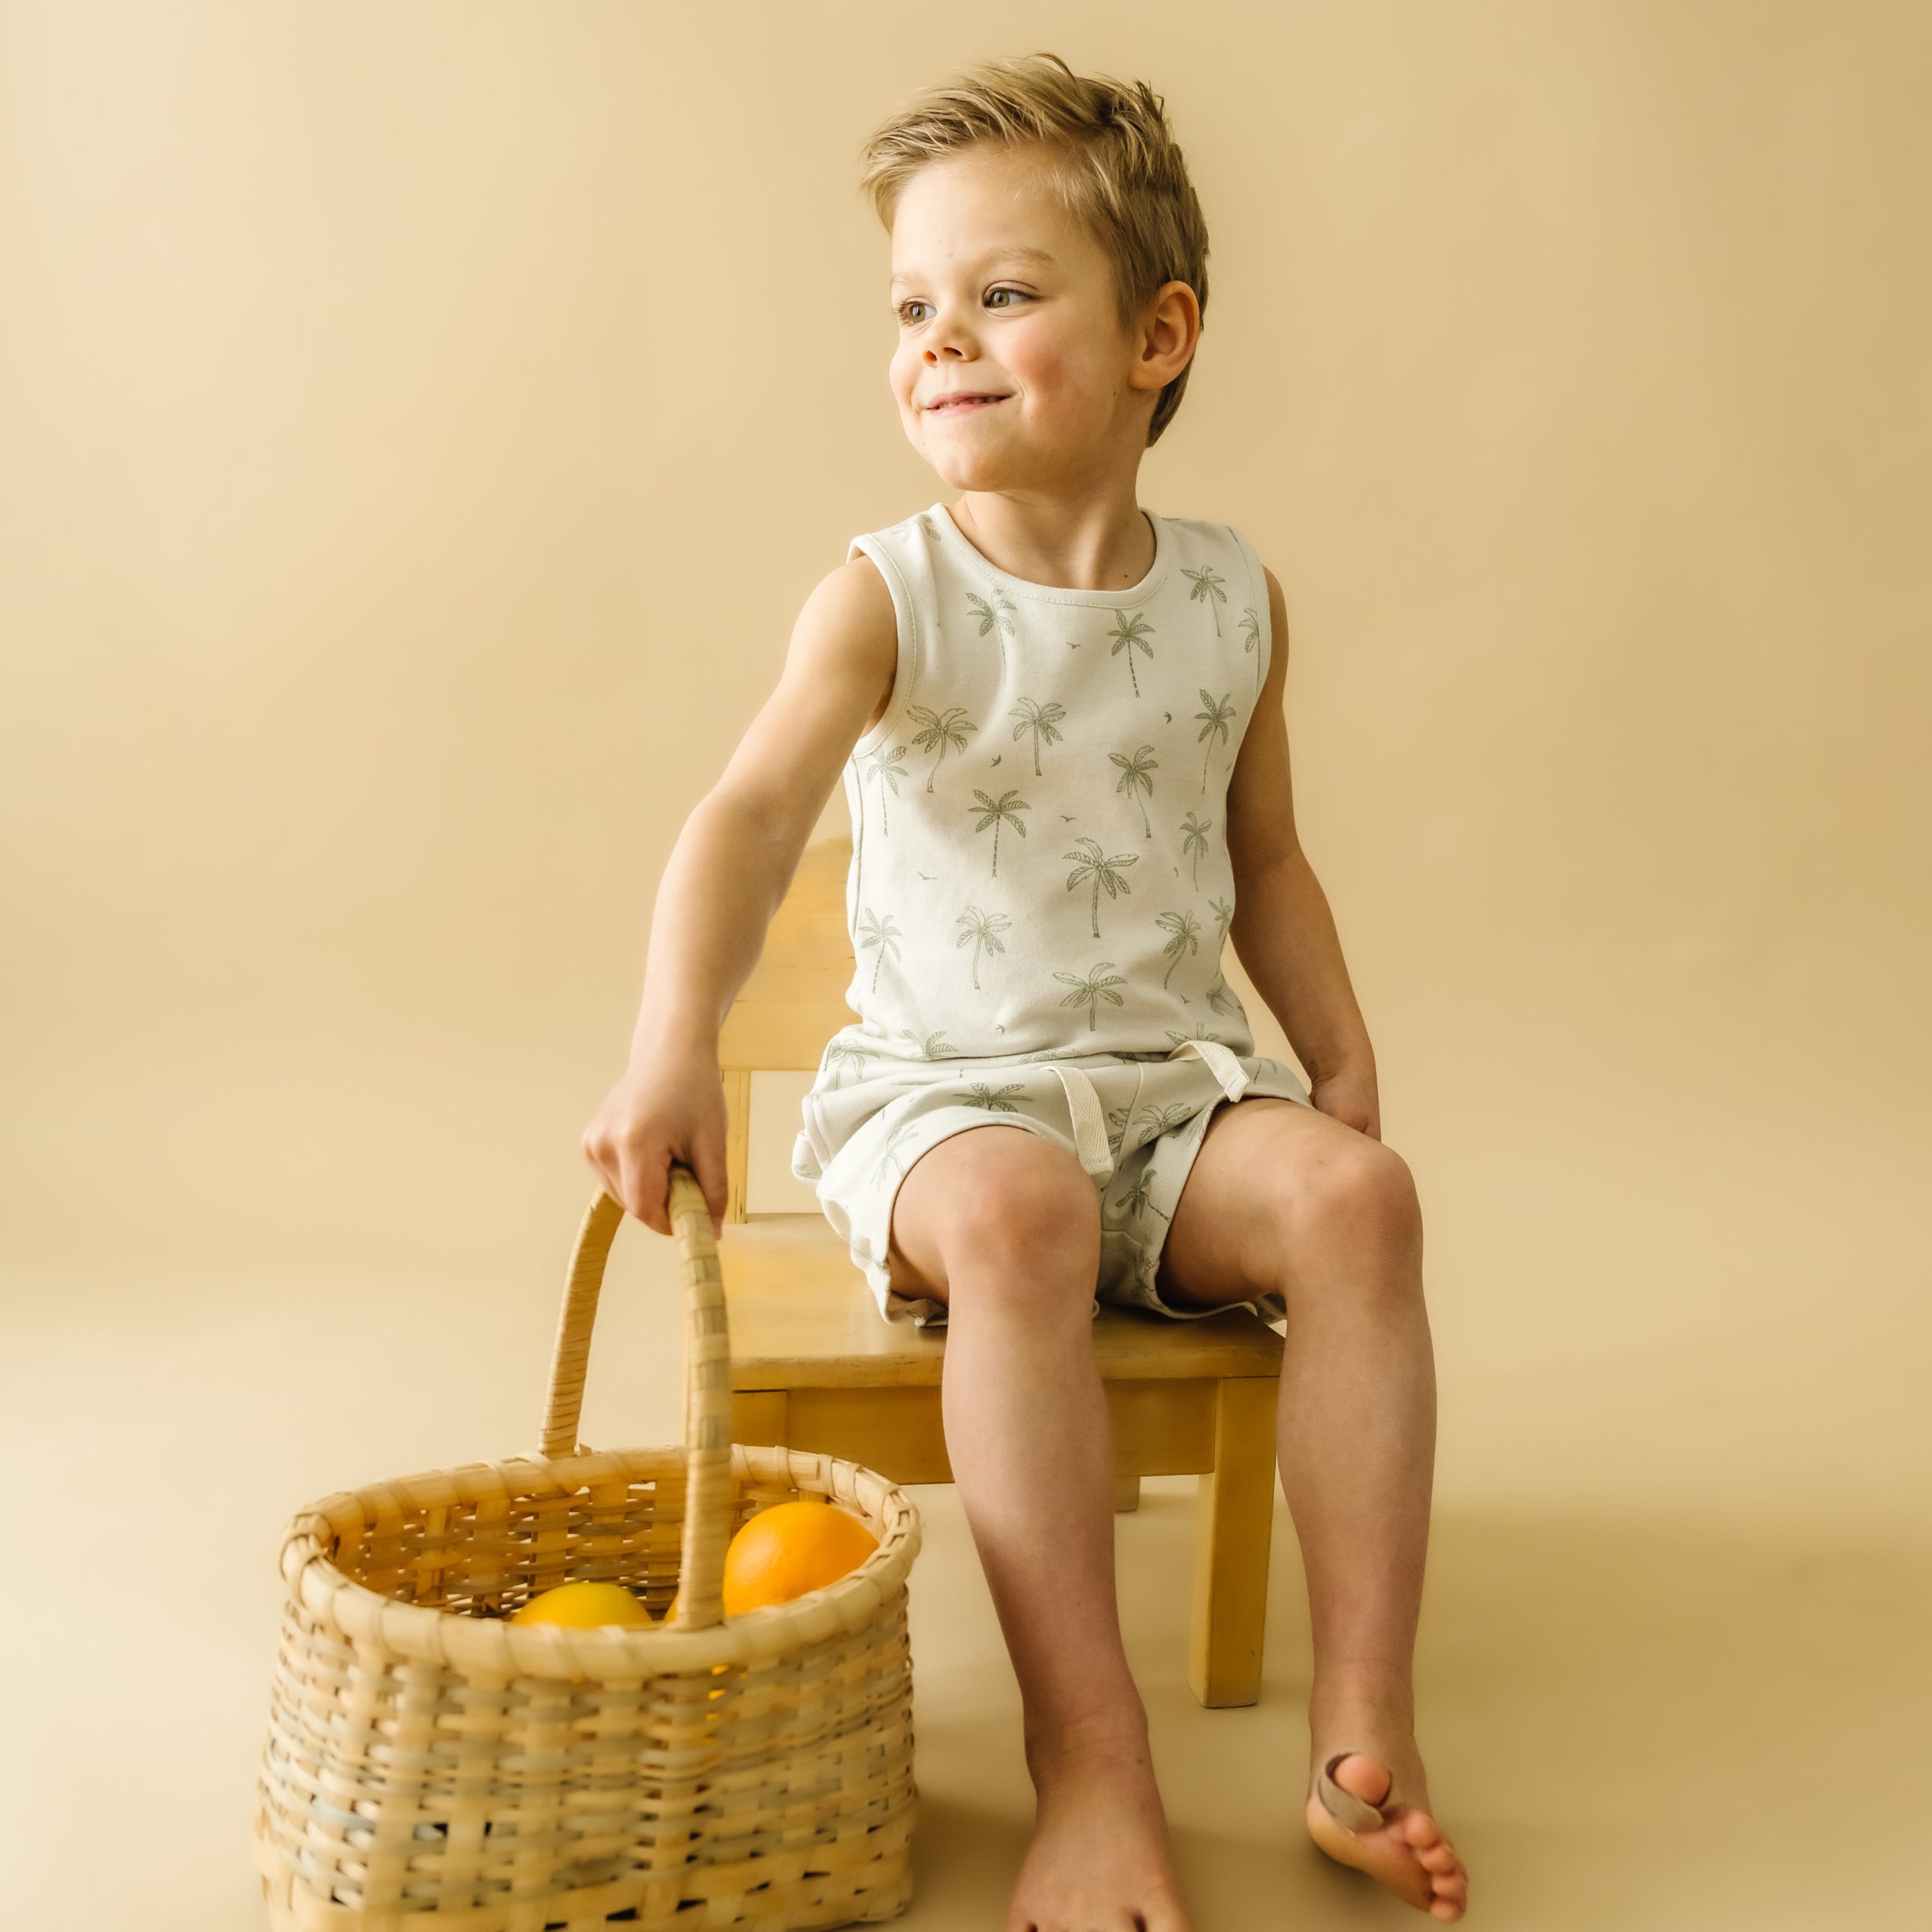 A young boy in a sleeveless shirt and shorts sits on a stool, smiling as he looks to the side, holding a Organic Kids wicker basket filled with oranges. The background is